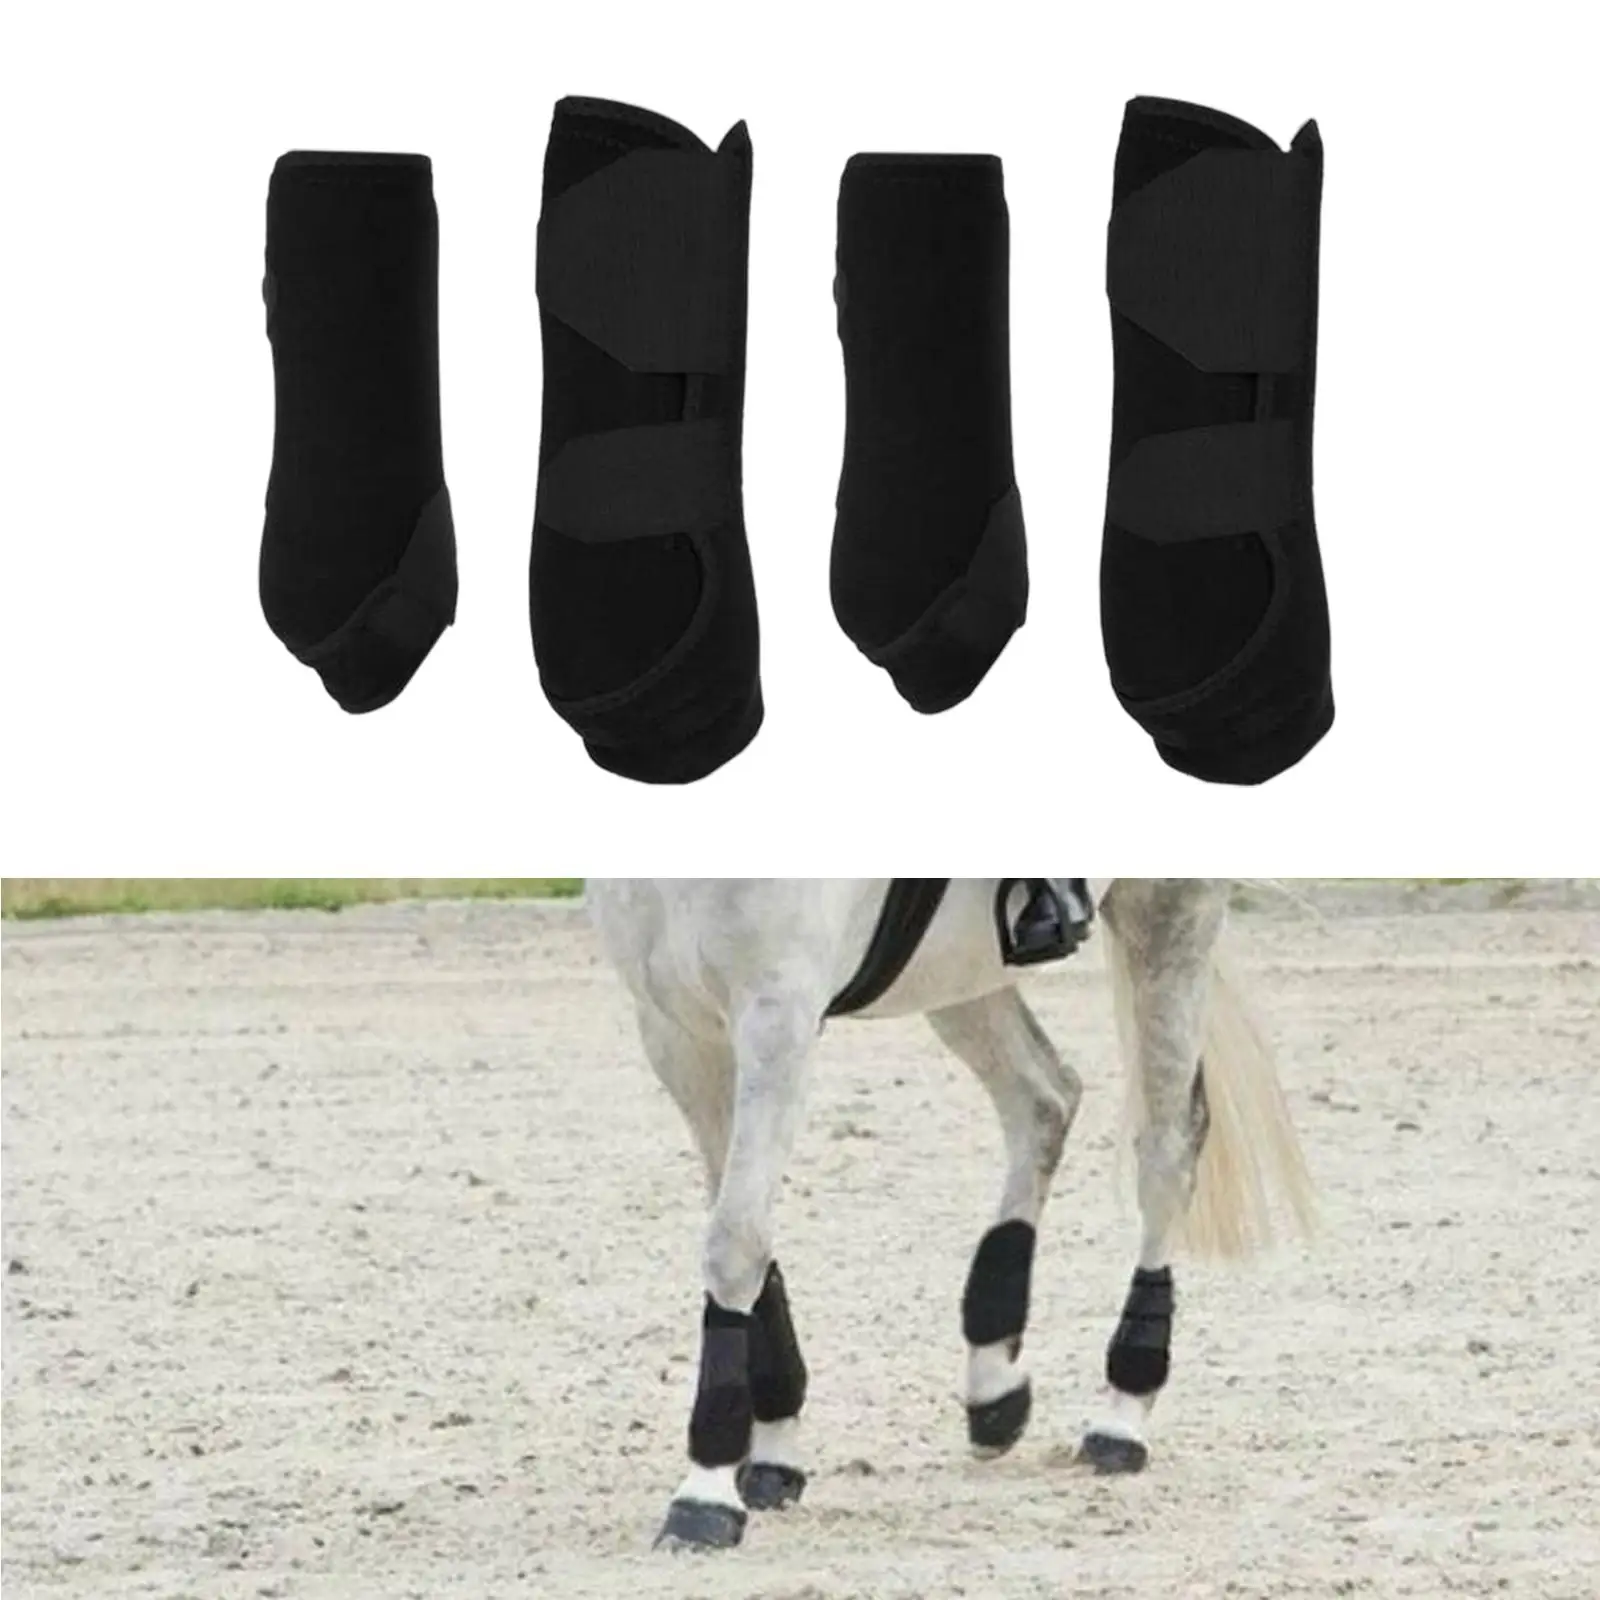 4x Neoprene Horse Boots Leg Wraps Shockproof Protector Tendon Protection Guard for Riding Training Equestrian Accessories